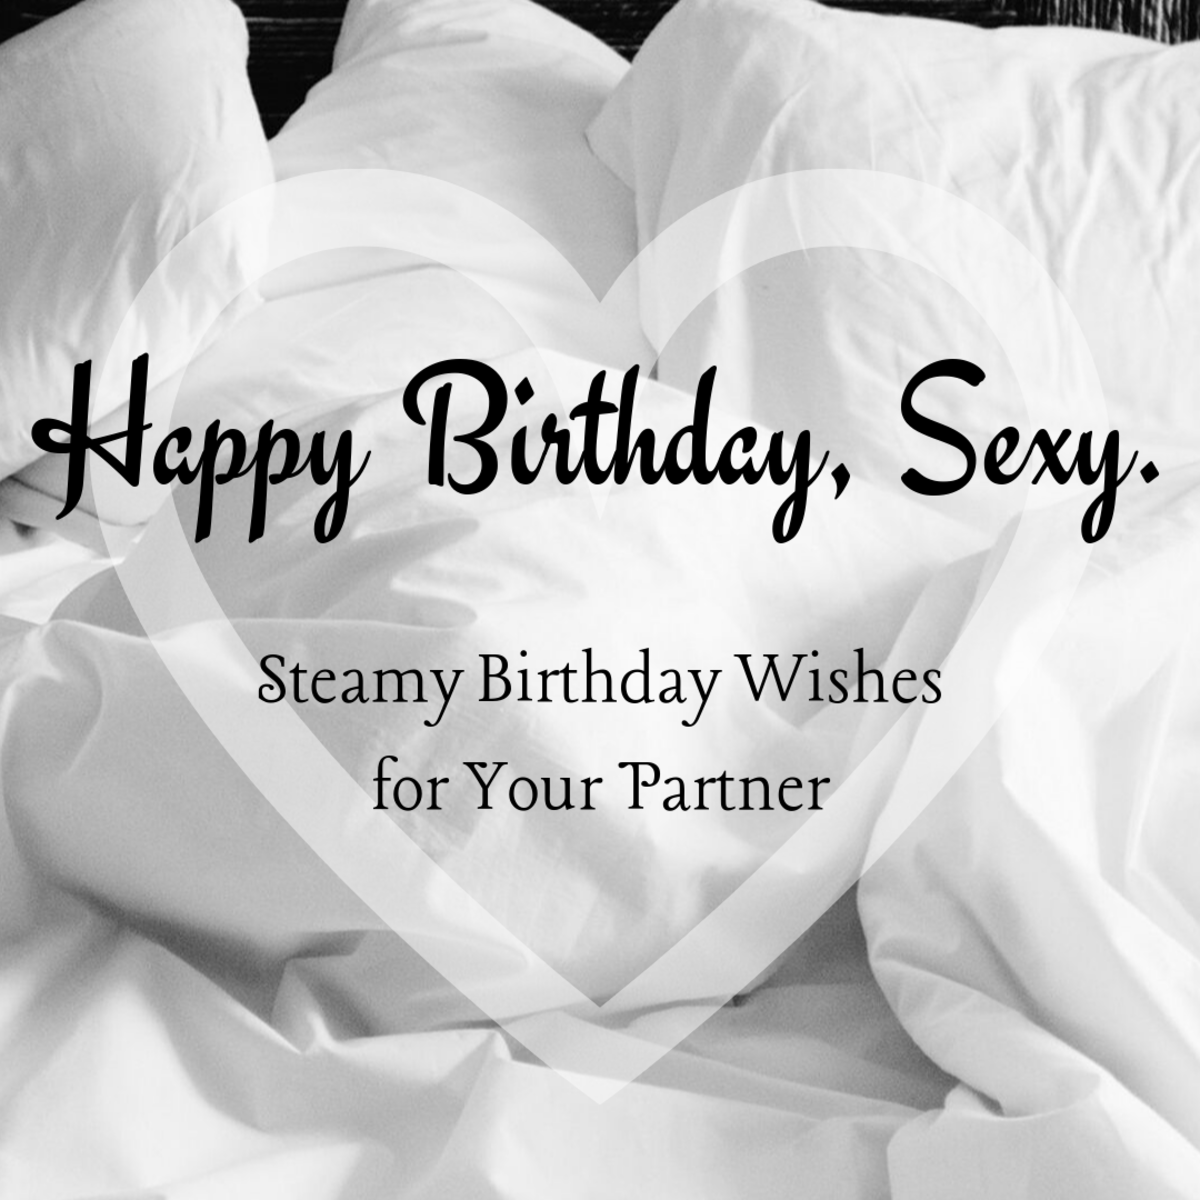 Find an idea for a steamy, sexy birthday wish for your partner.